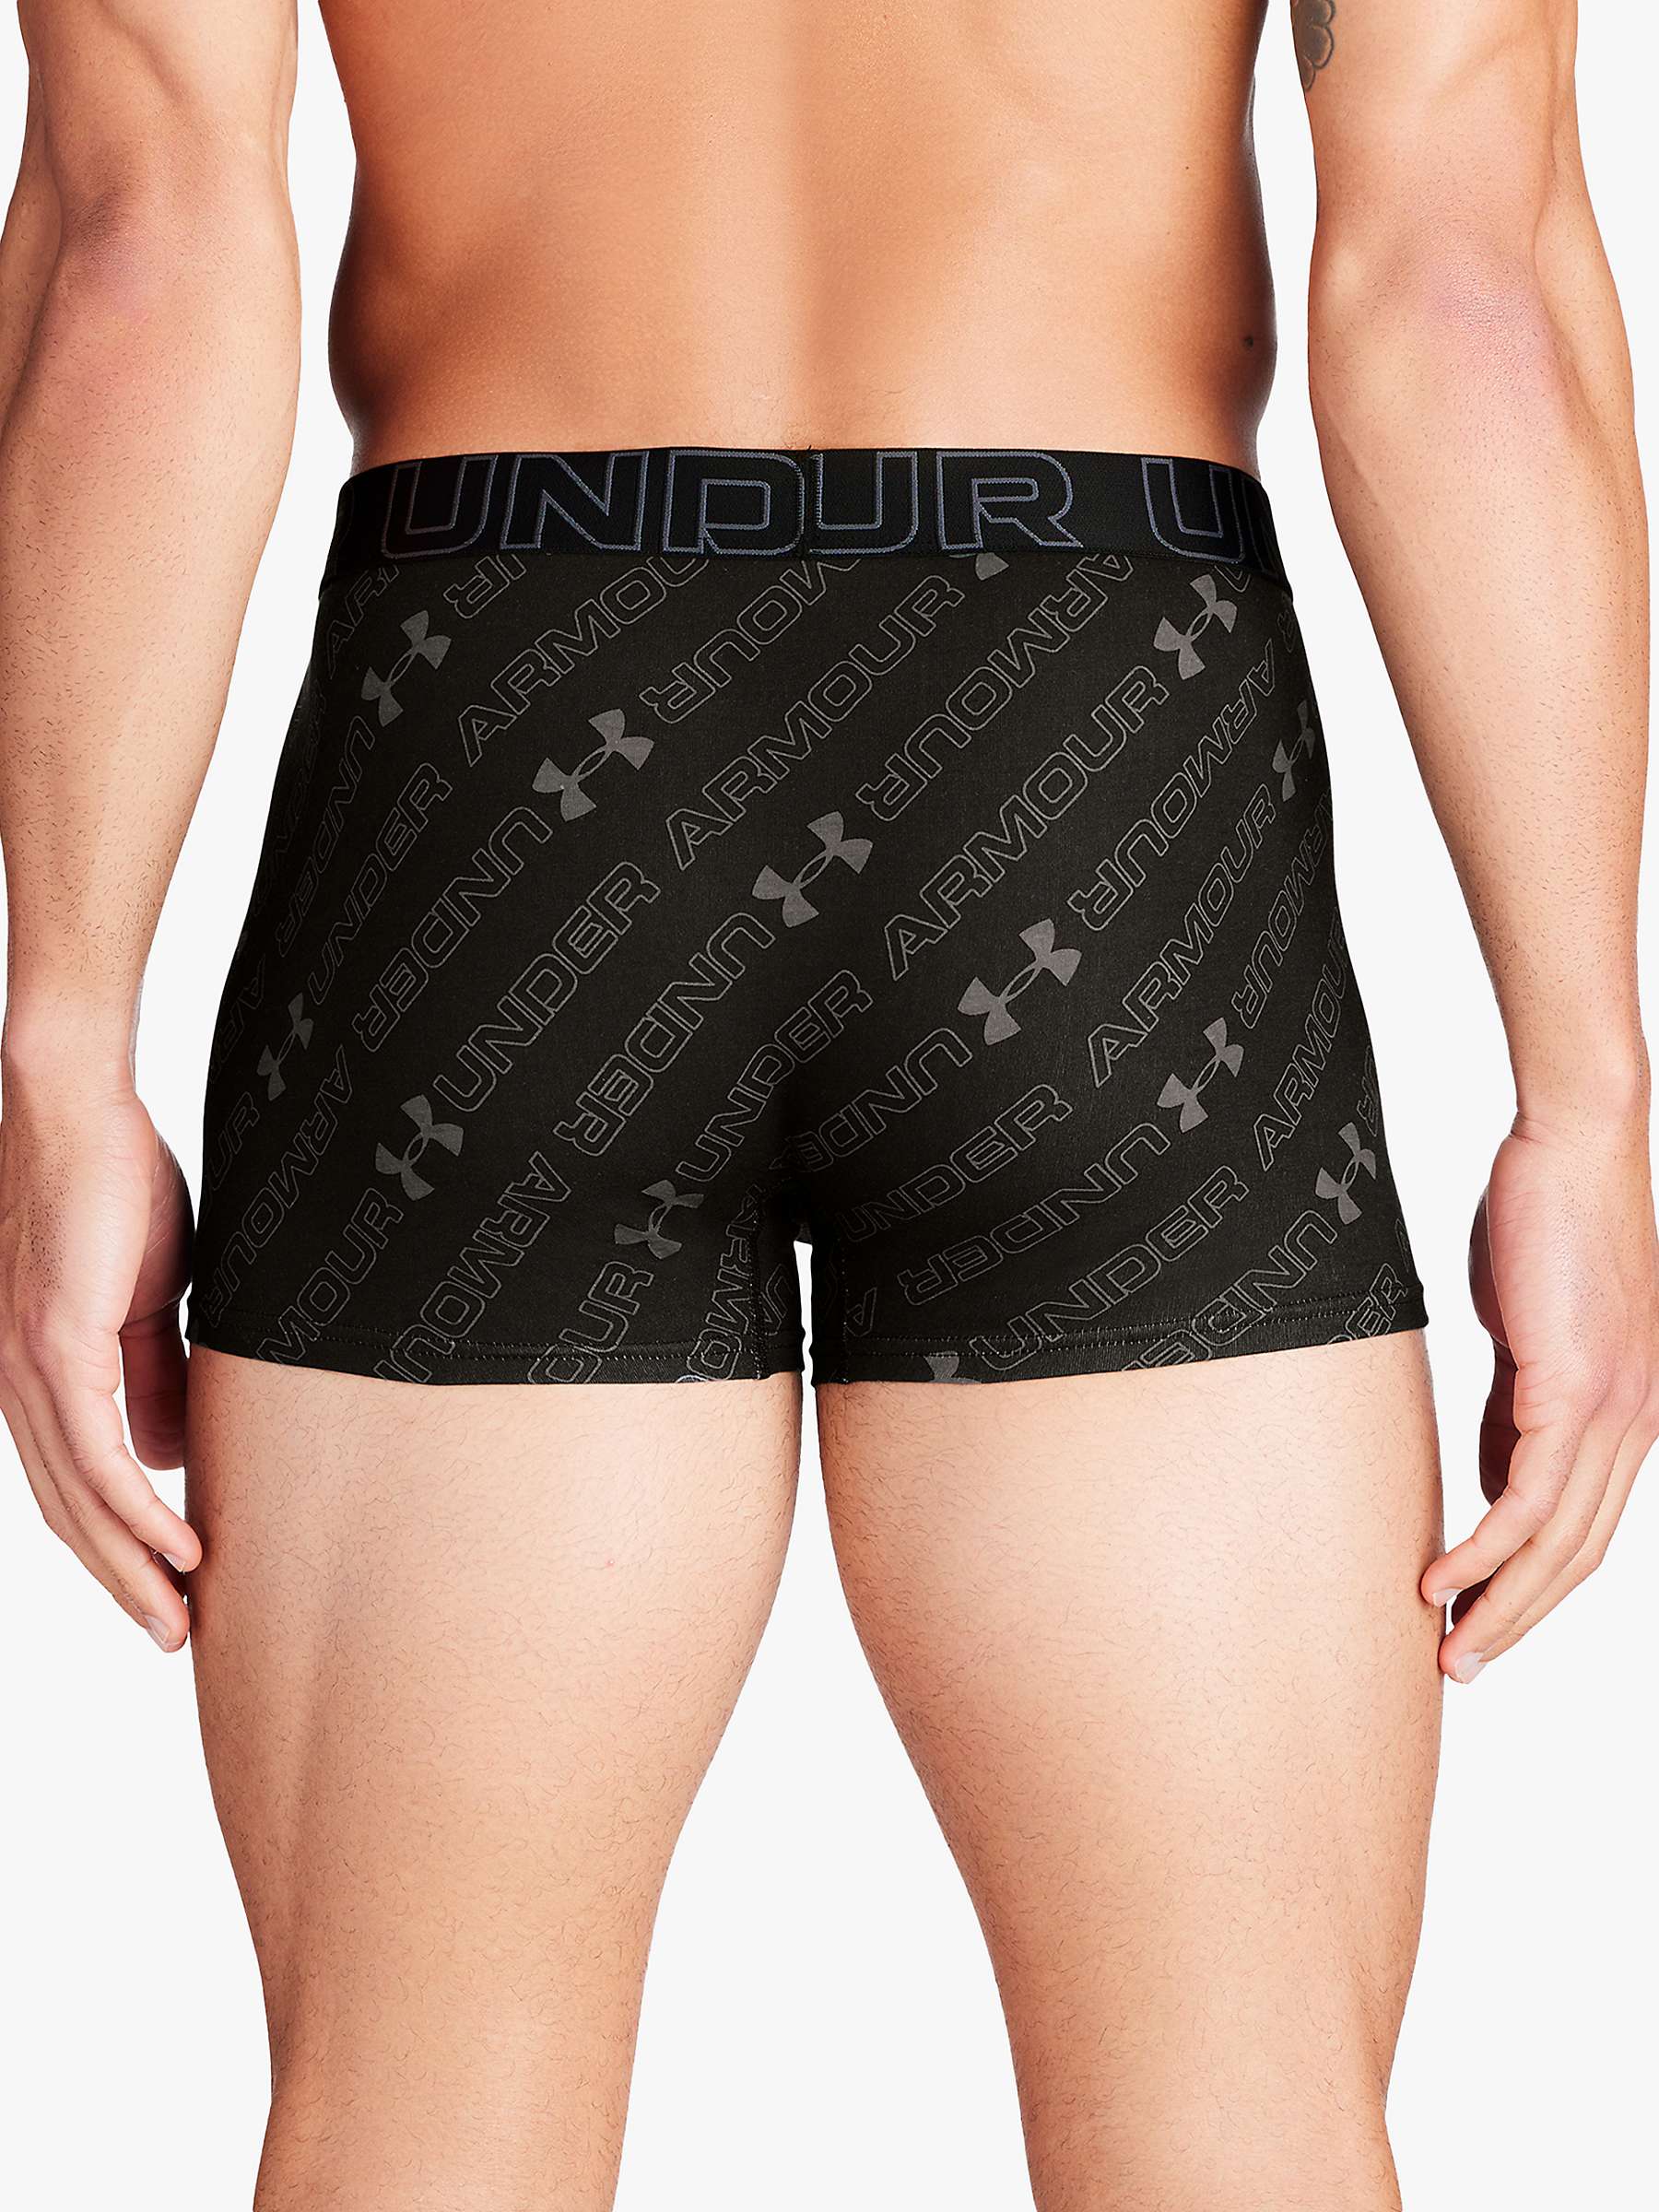 Buy Under Armour Performance Comfort Boxers, Pack of 3, Grey/Black Online at johnlewis.com